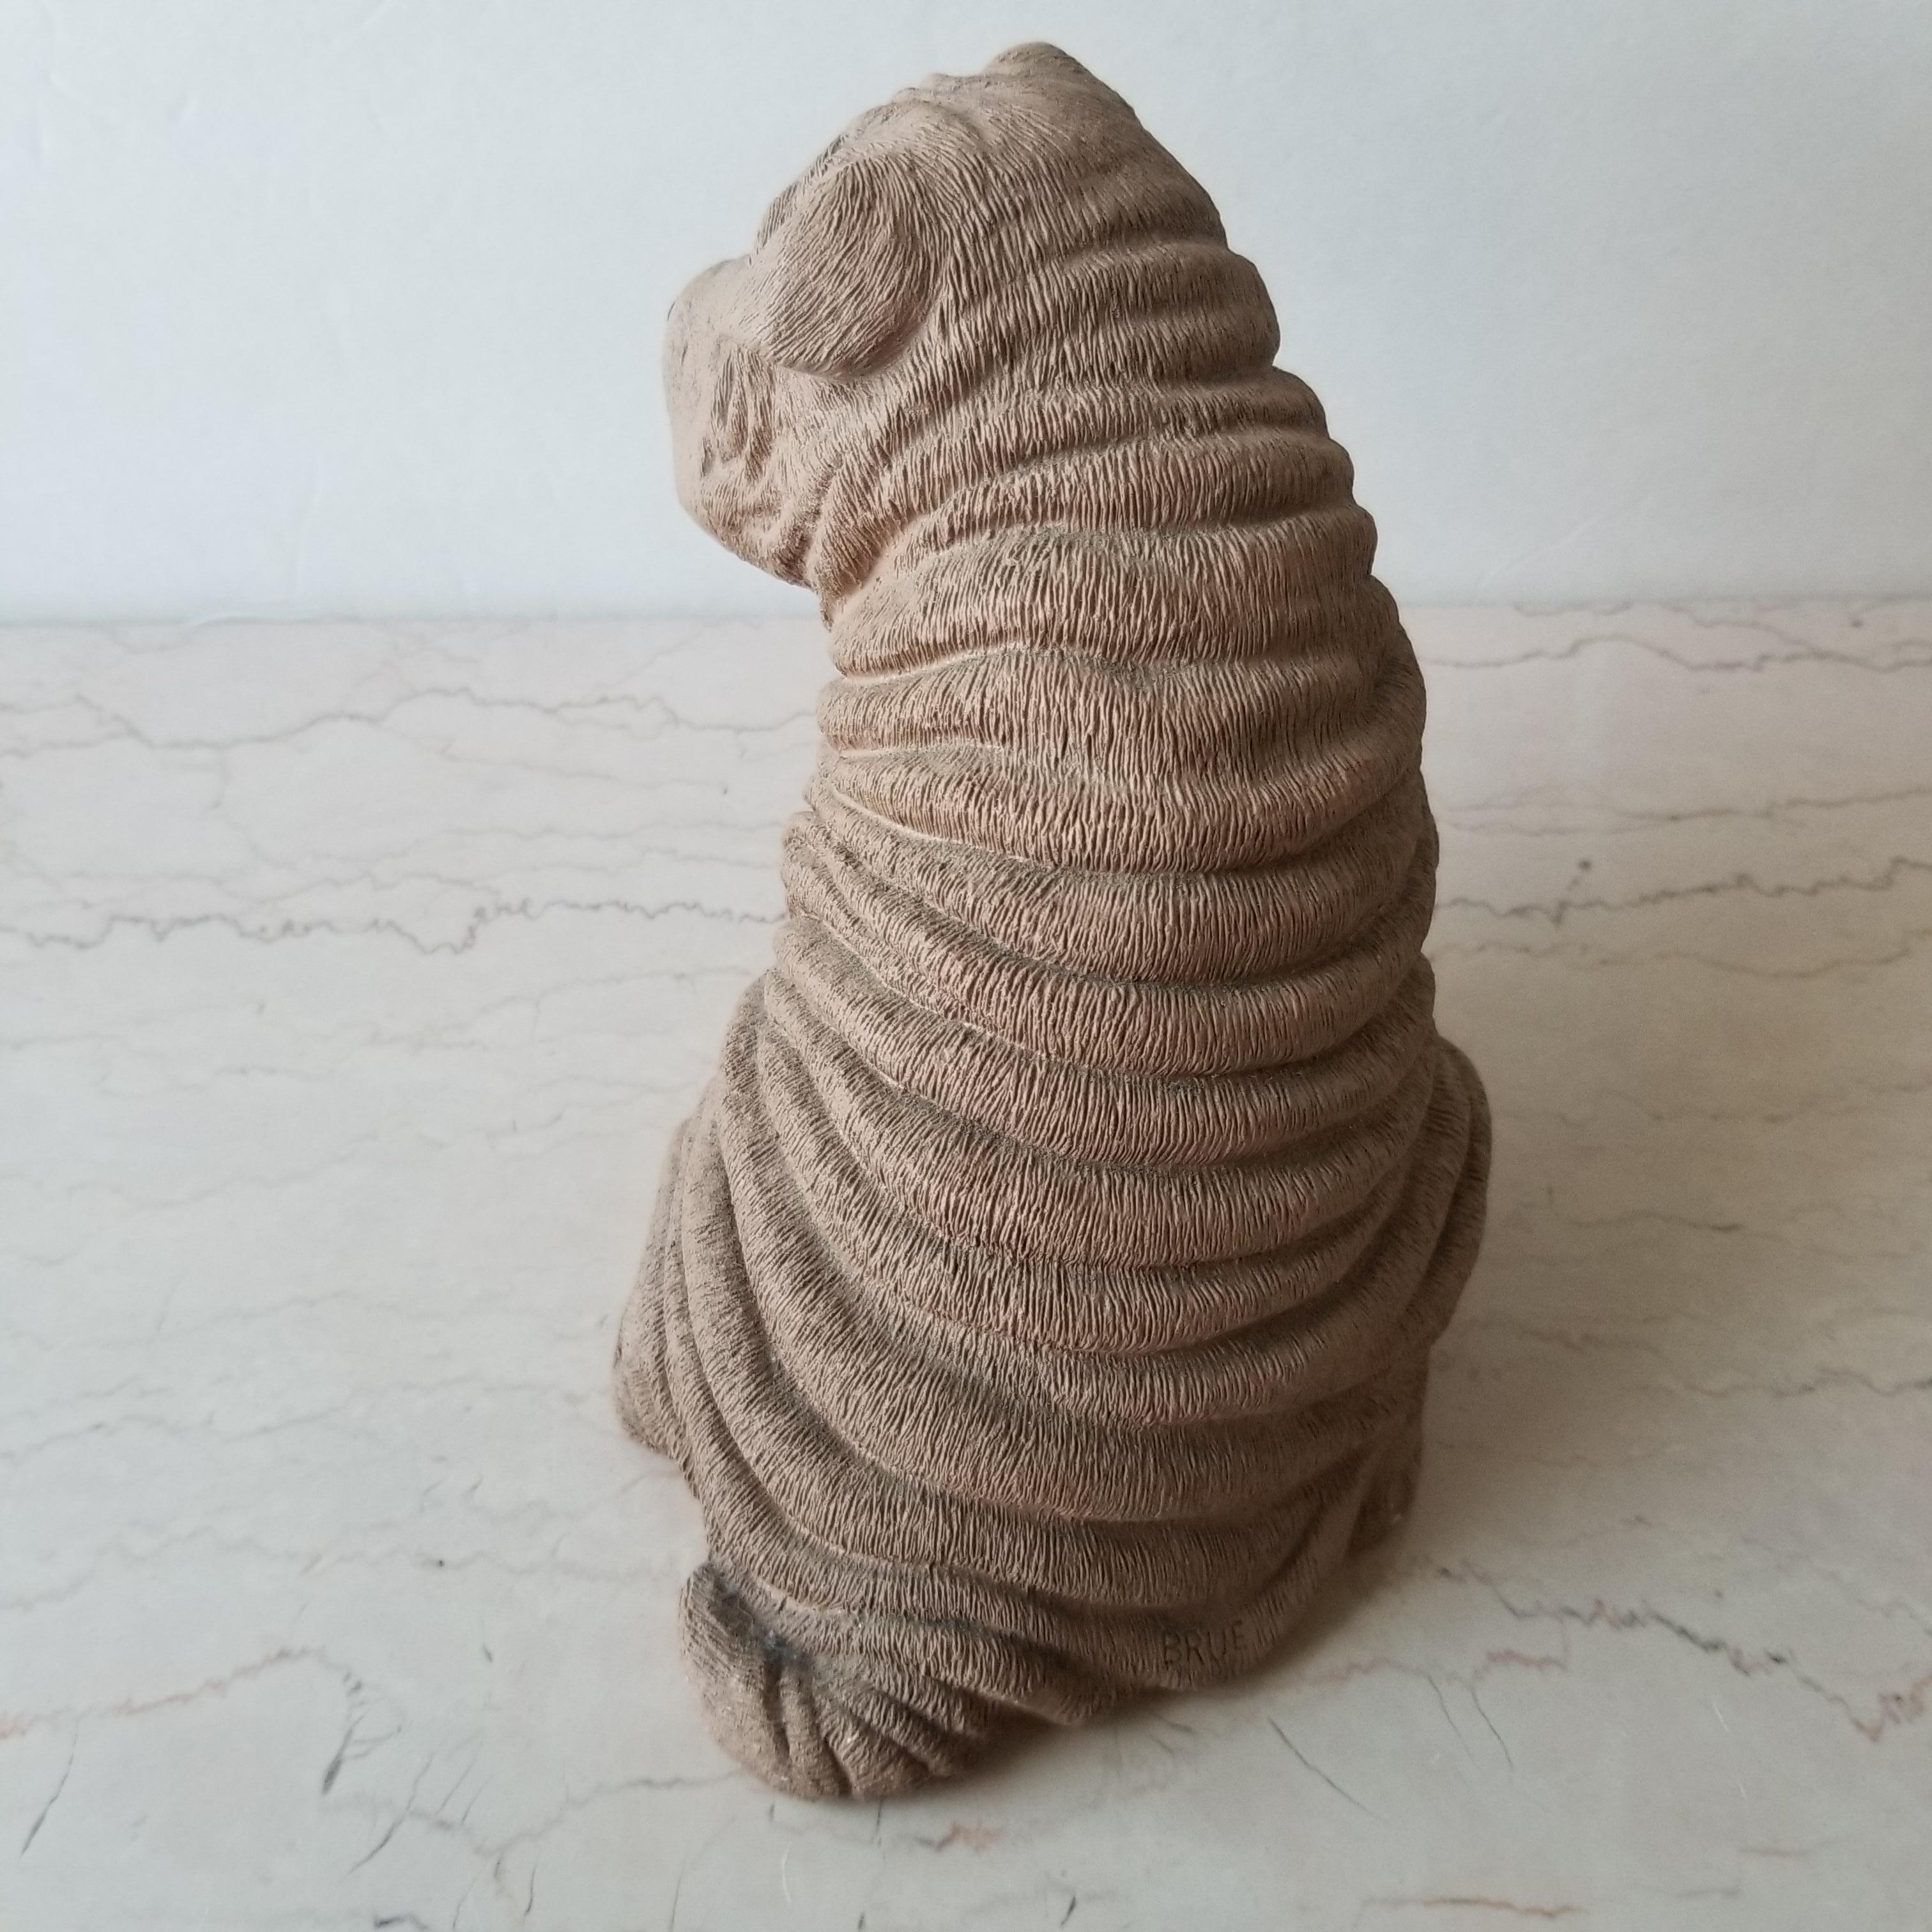 American 1986 Chinese Shar Pei Dog Sculpture Sandicast by Sandra Brue San Diego CA For Sale